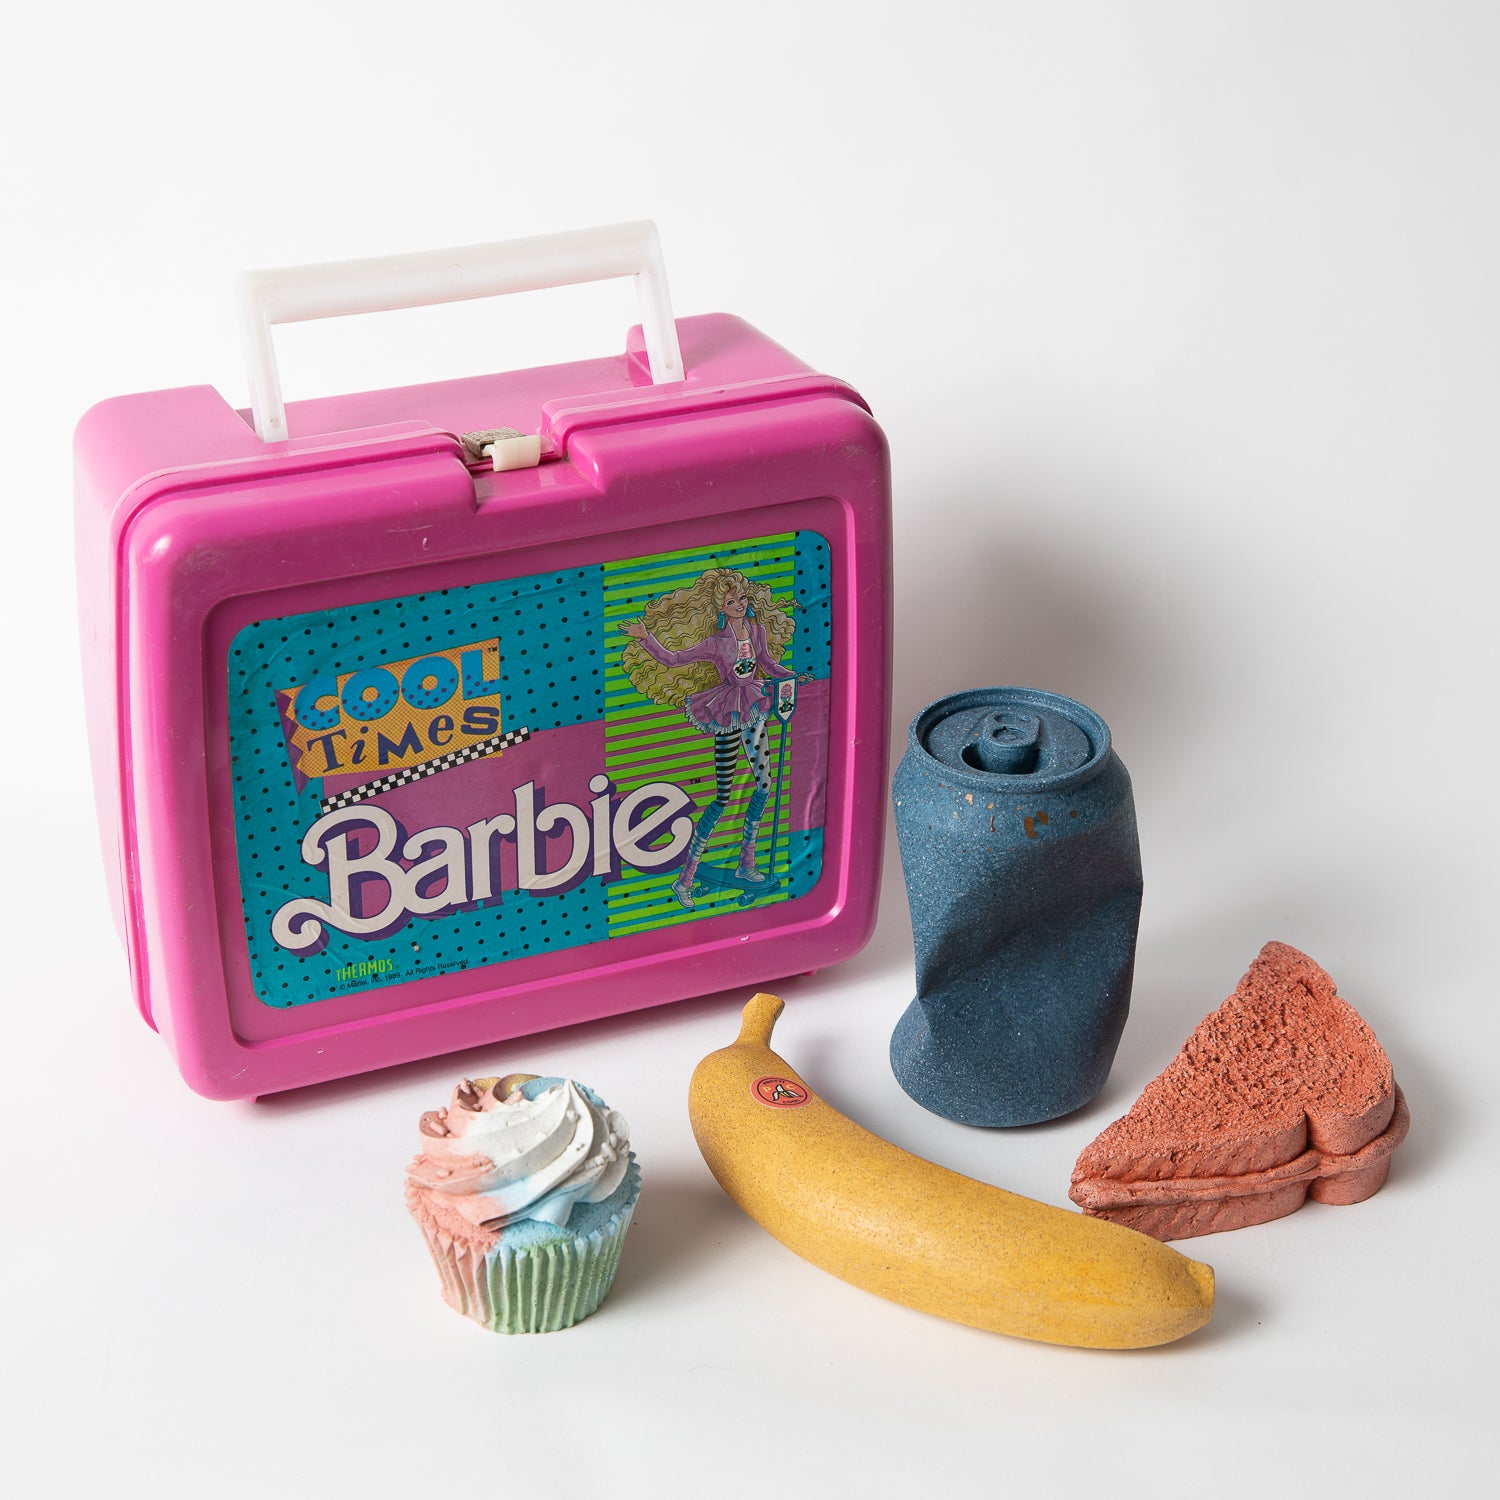 Barbie | Soft Lunch Box | Thermos